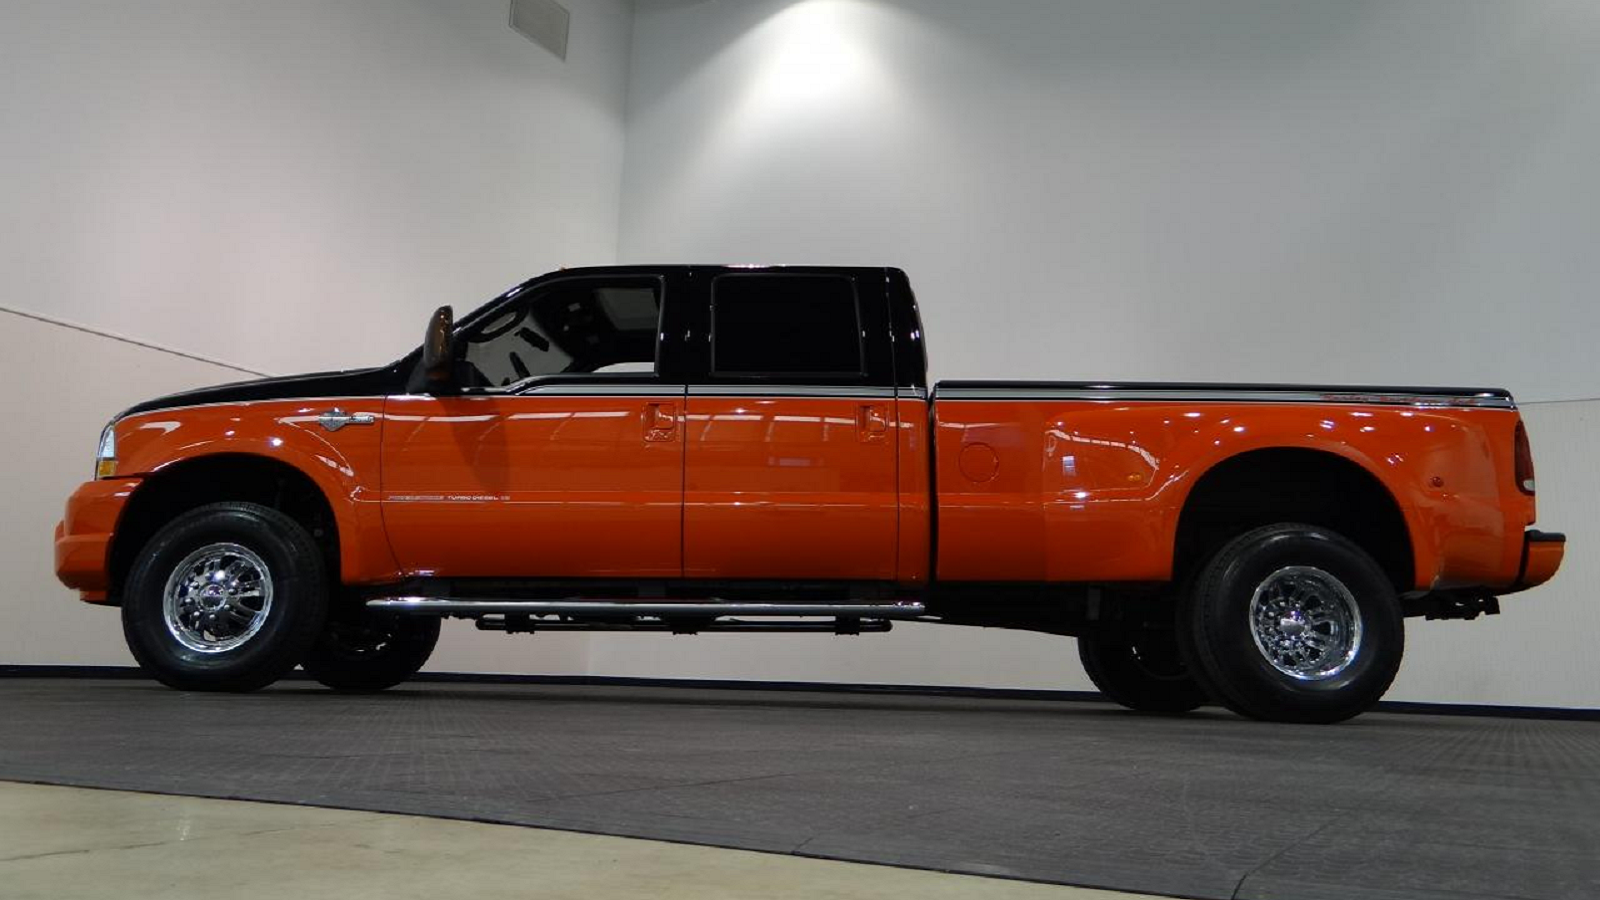 Daily Slideshow Ford F350 HarleyDavidson Is Truly One of a Kind